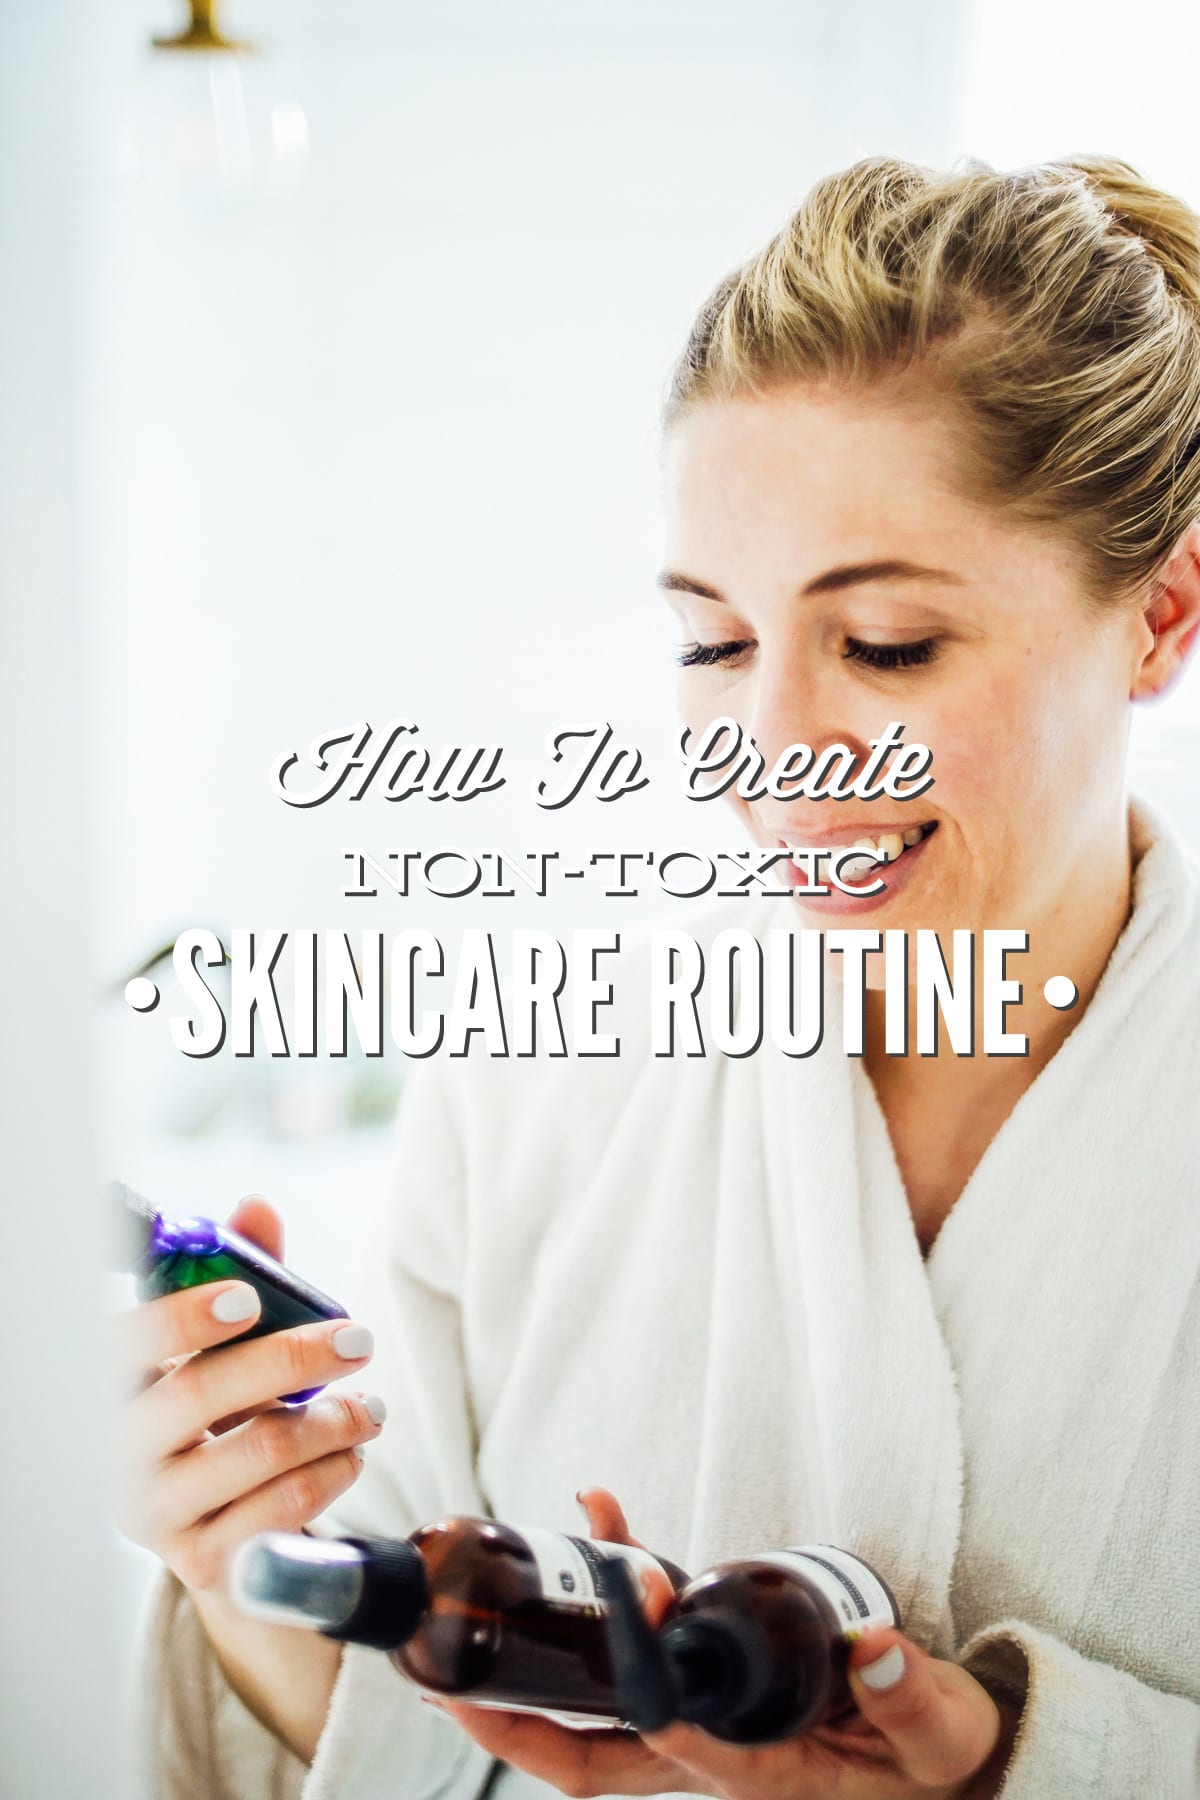 How to Create Your Own Non-Toxic Skincare Routine On Any Budget